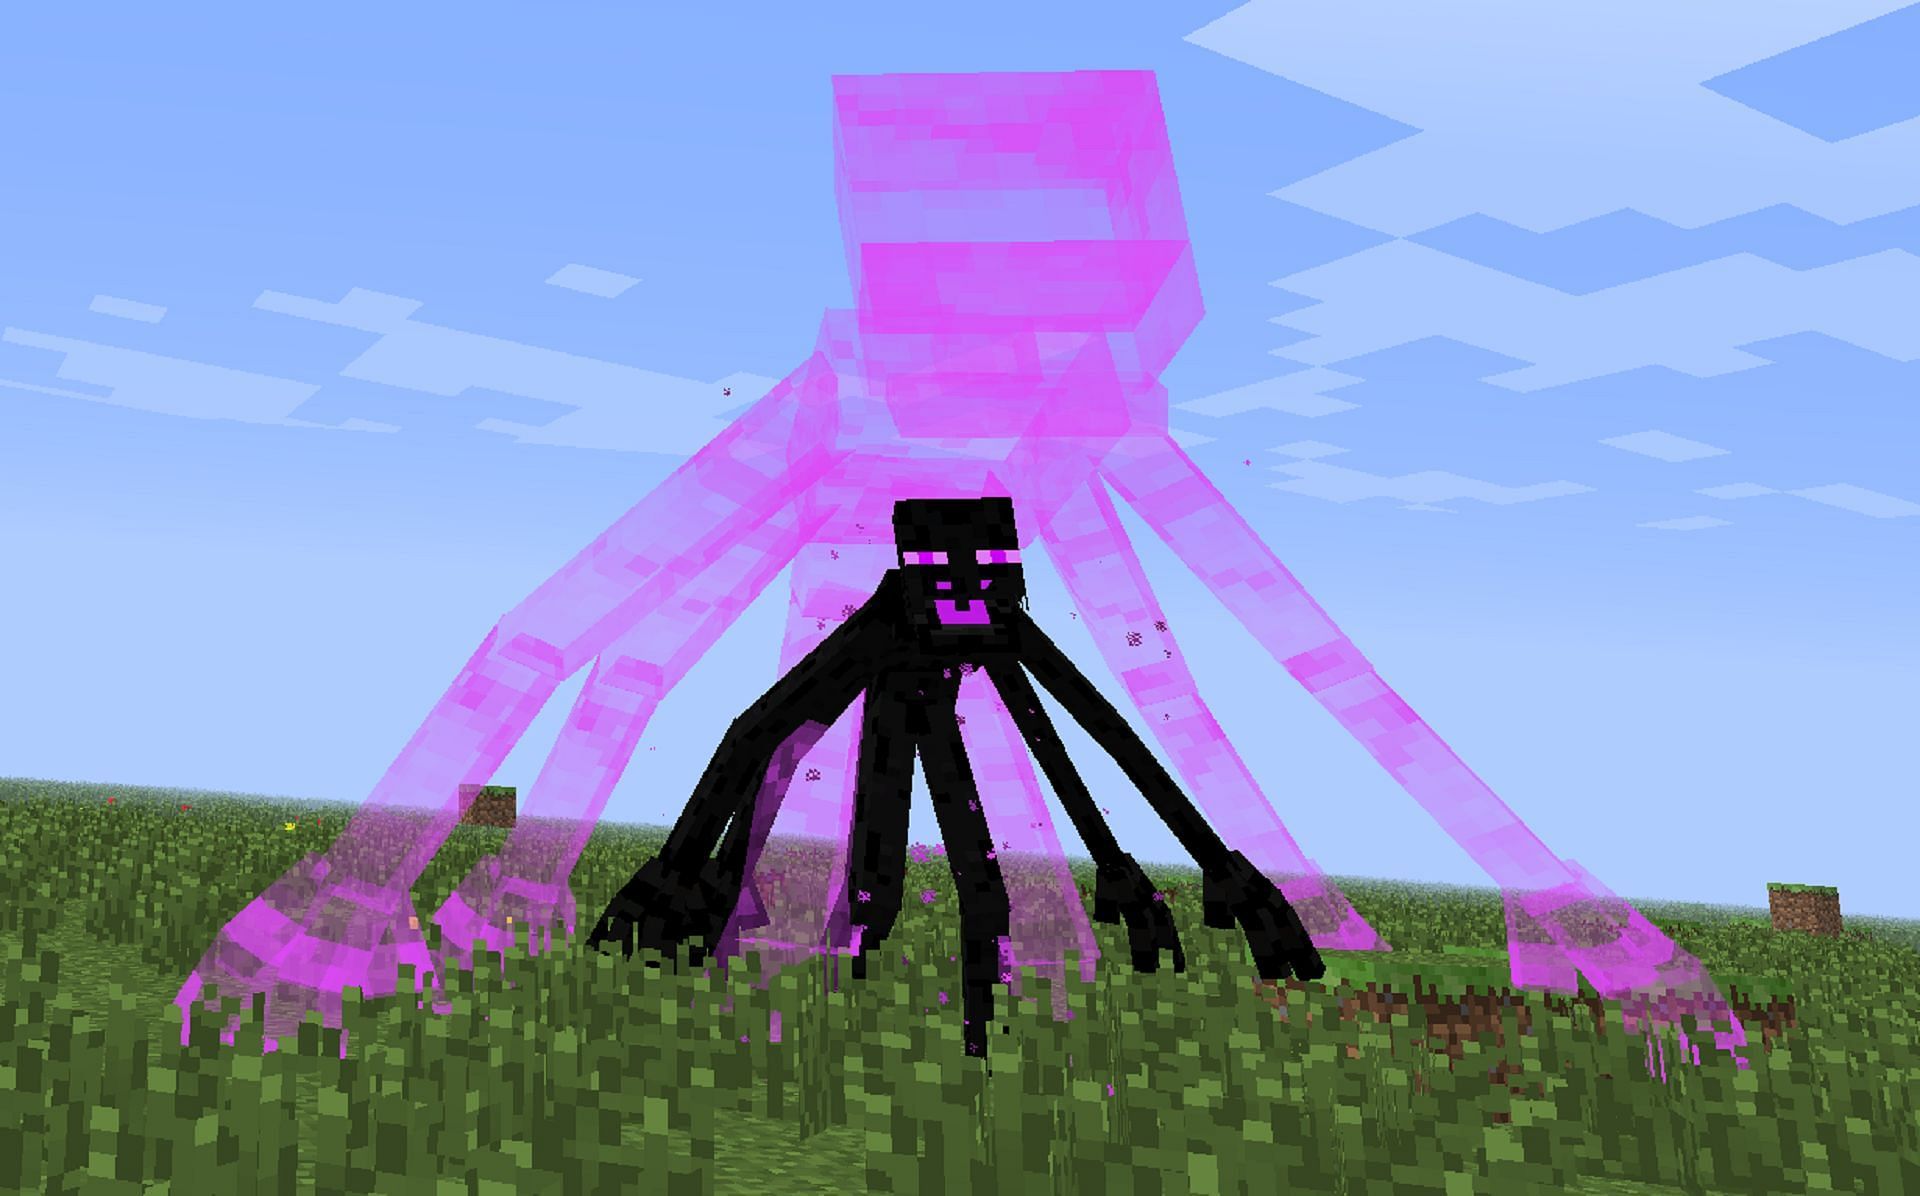 A mutant enderman, one of the bosses featured in the list (Image via Minecraft)